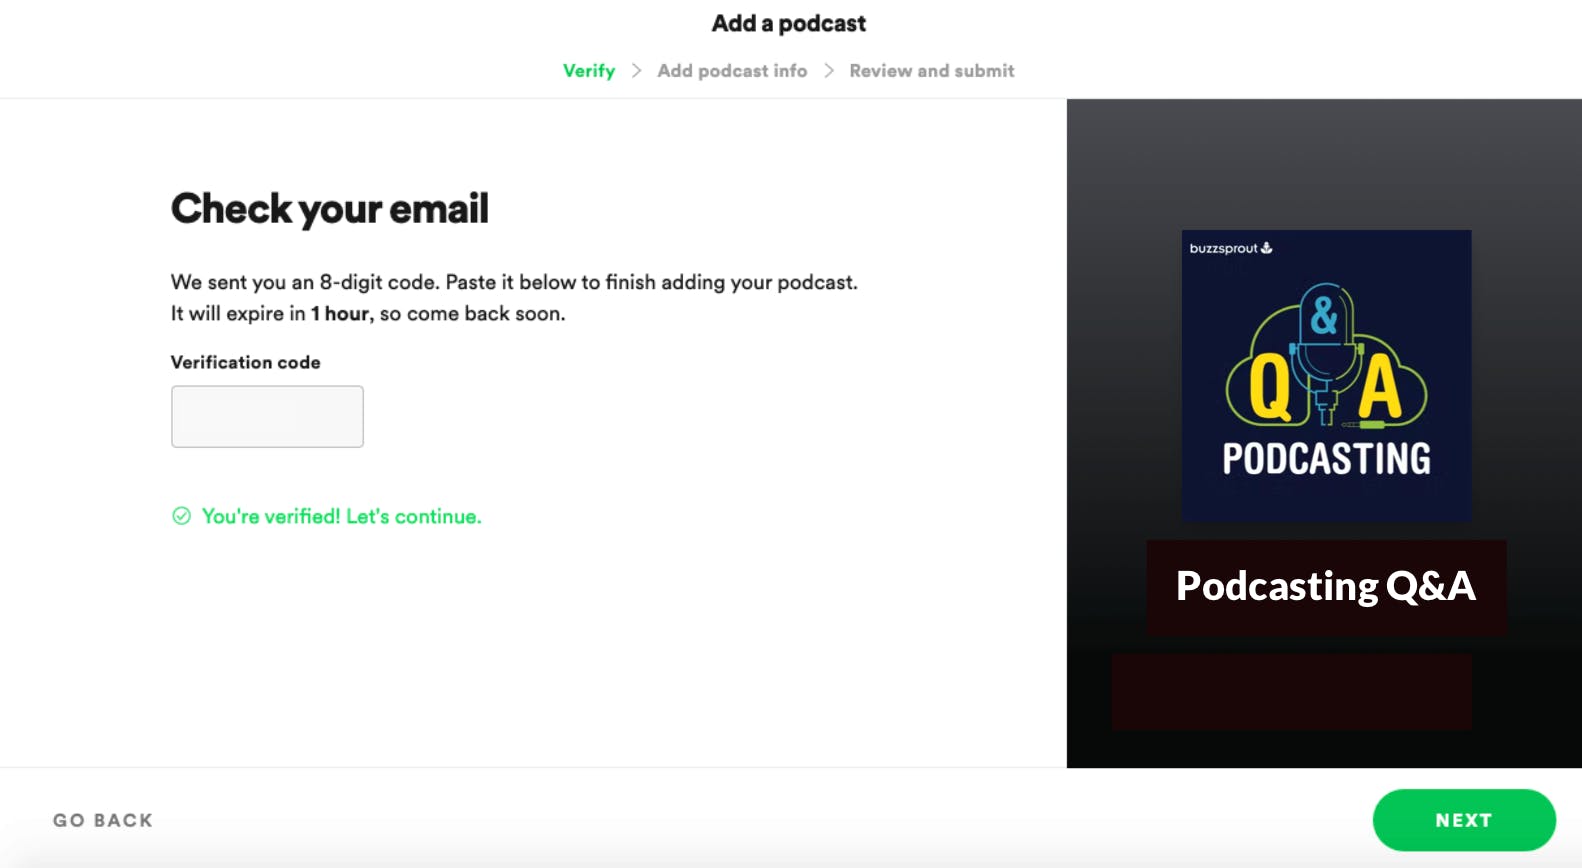 Verification code page with Podcasting Q&A artwork on the right and green button that says 